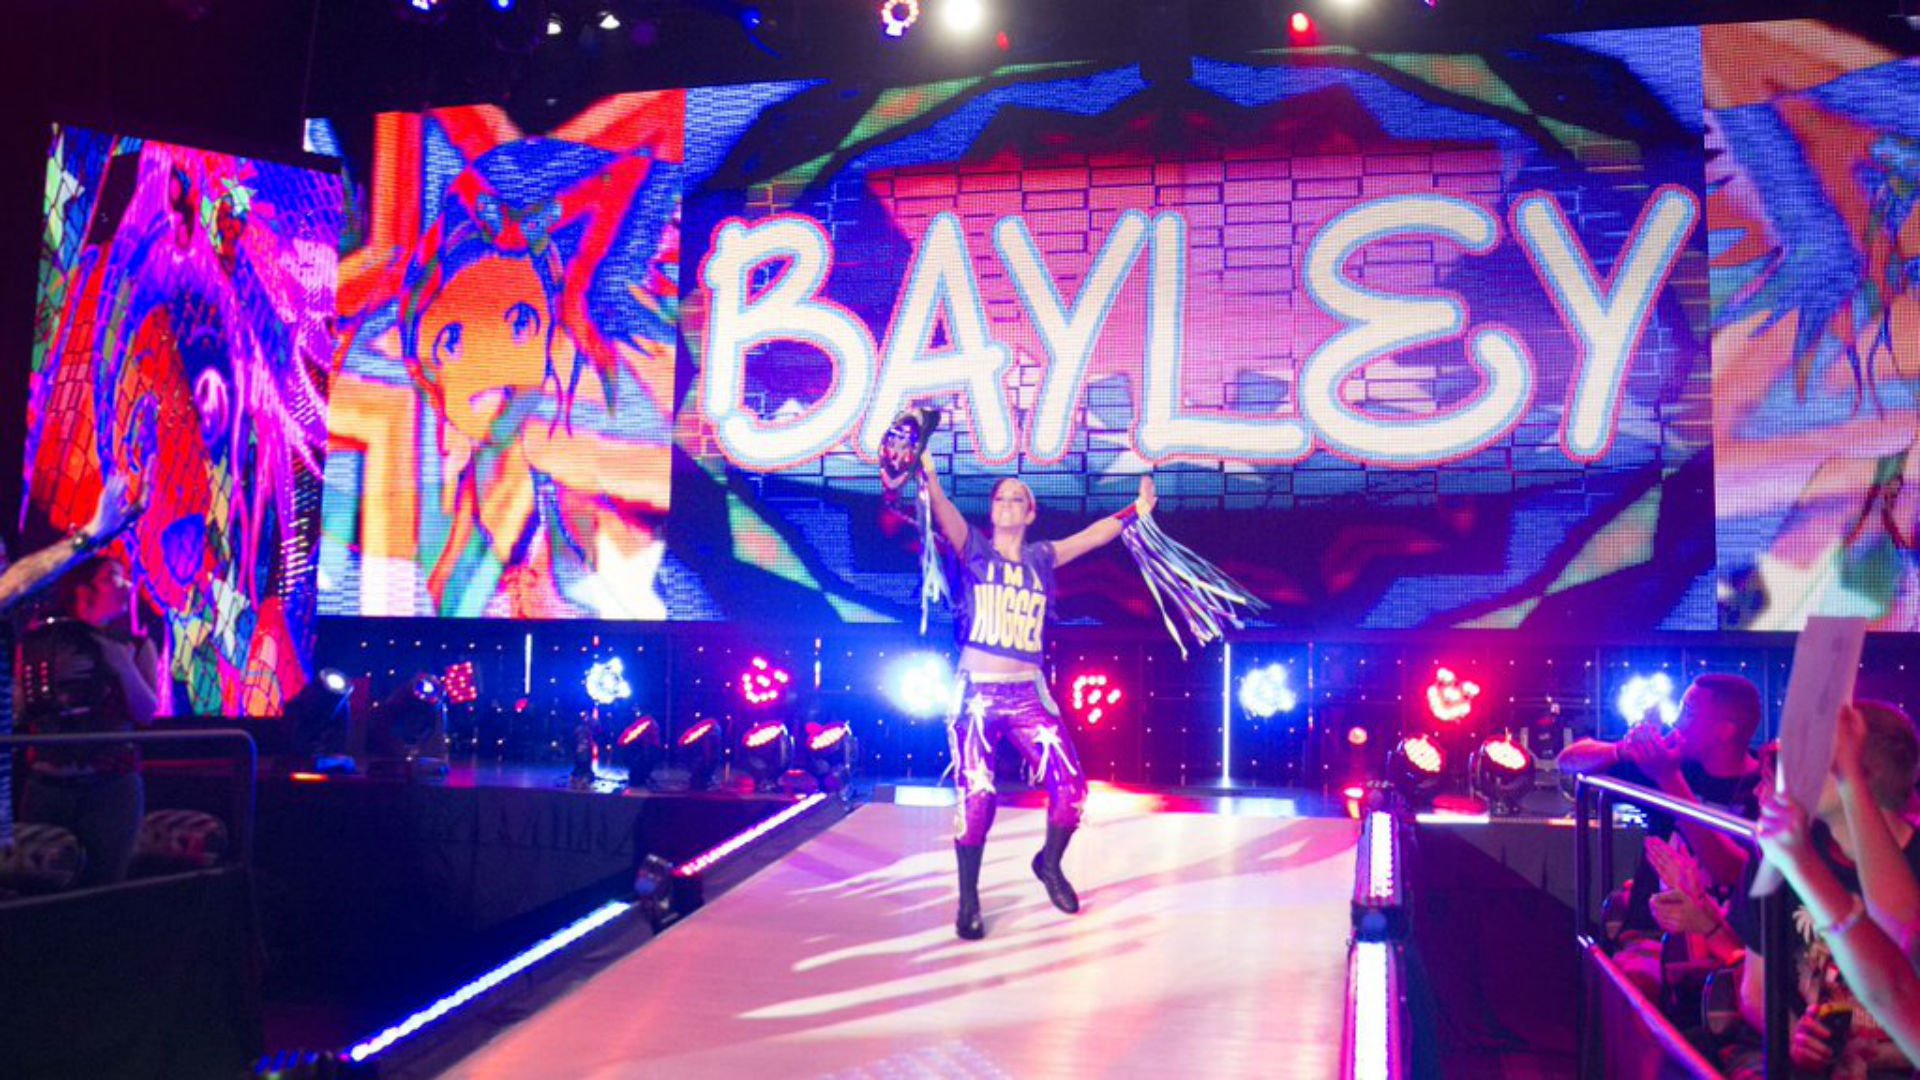 Wwe Star Bayley On 2k17 Now I Get To Have Dream